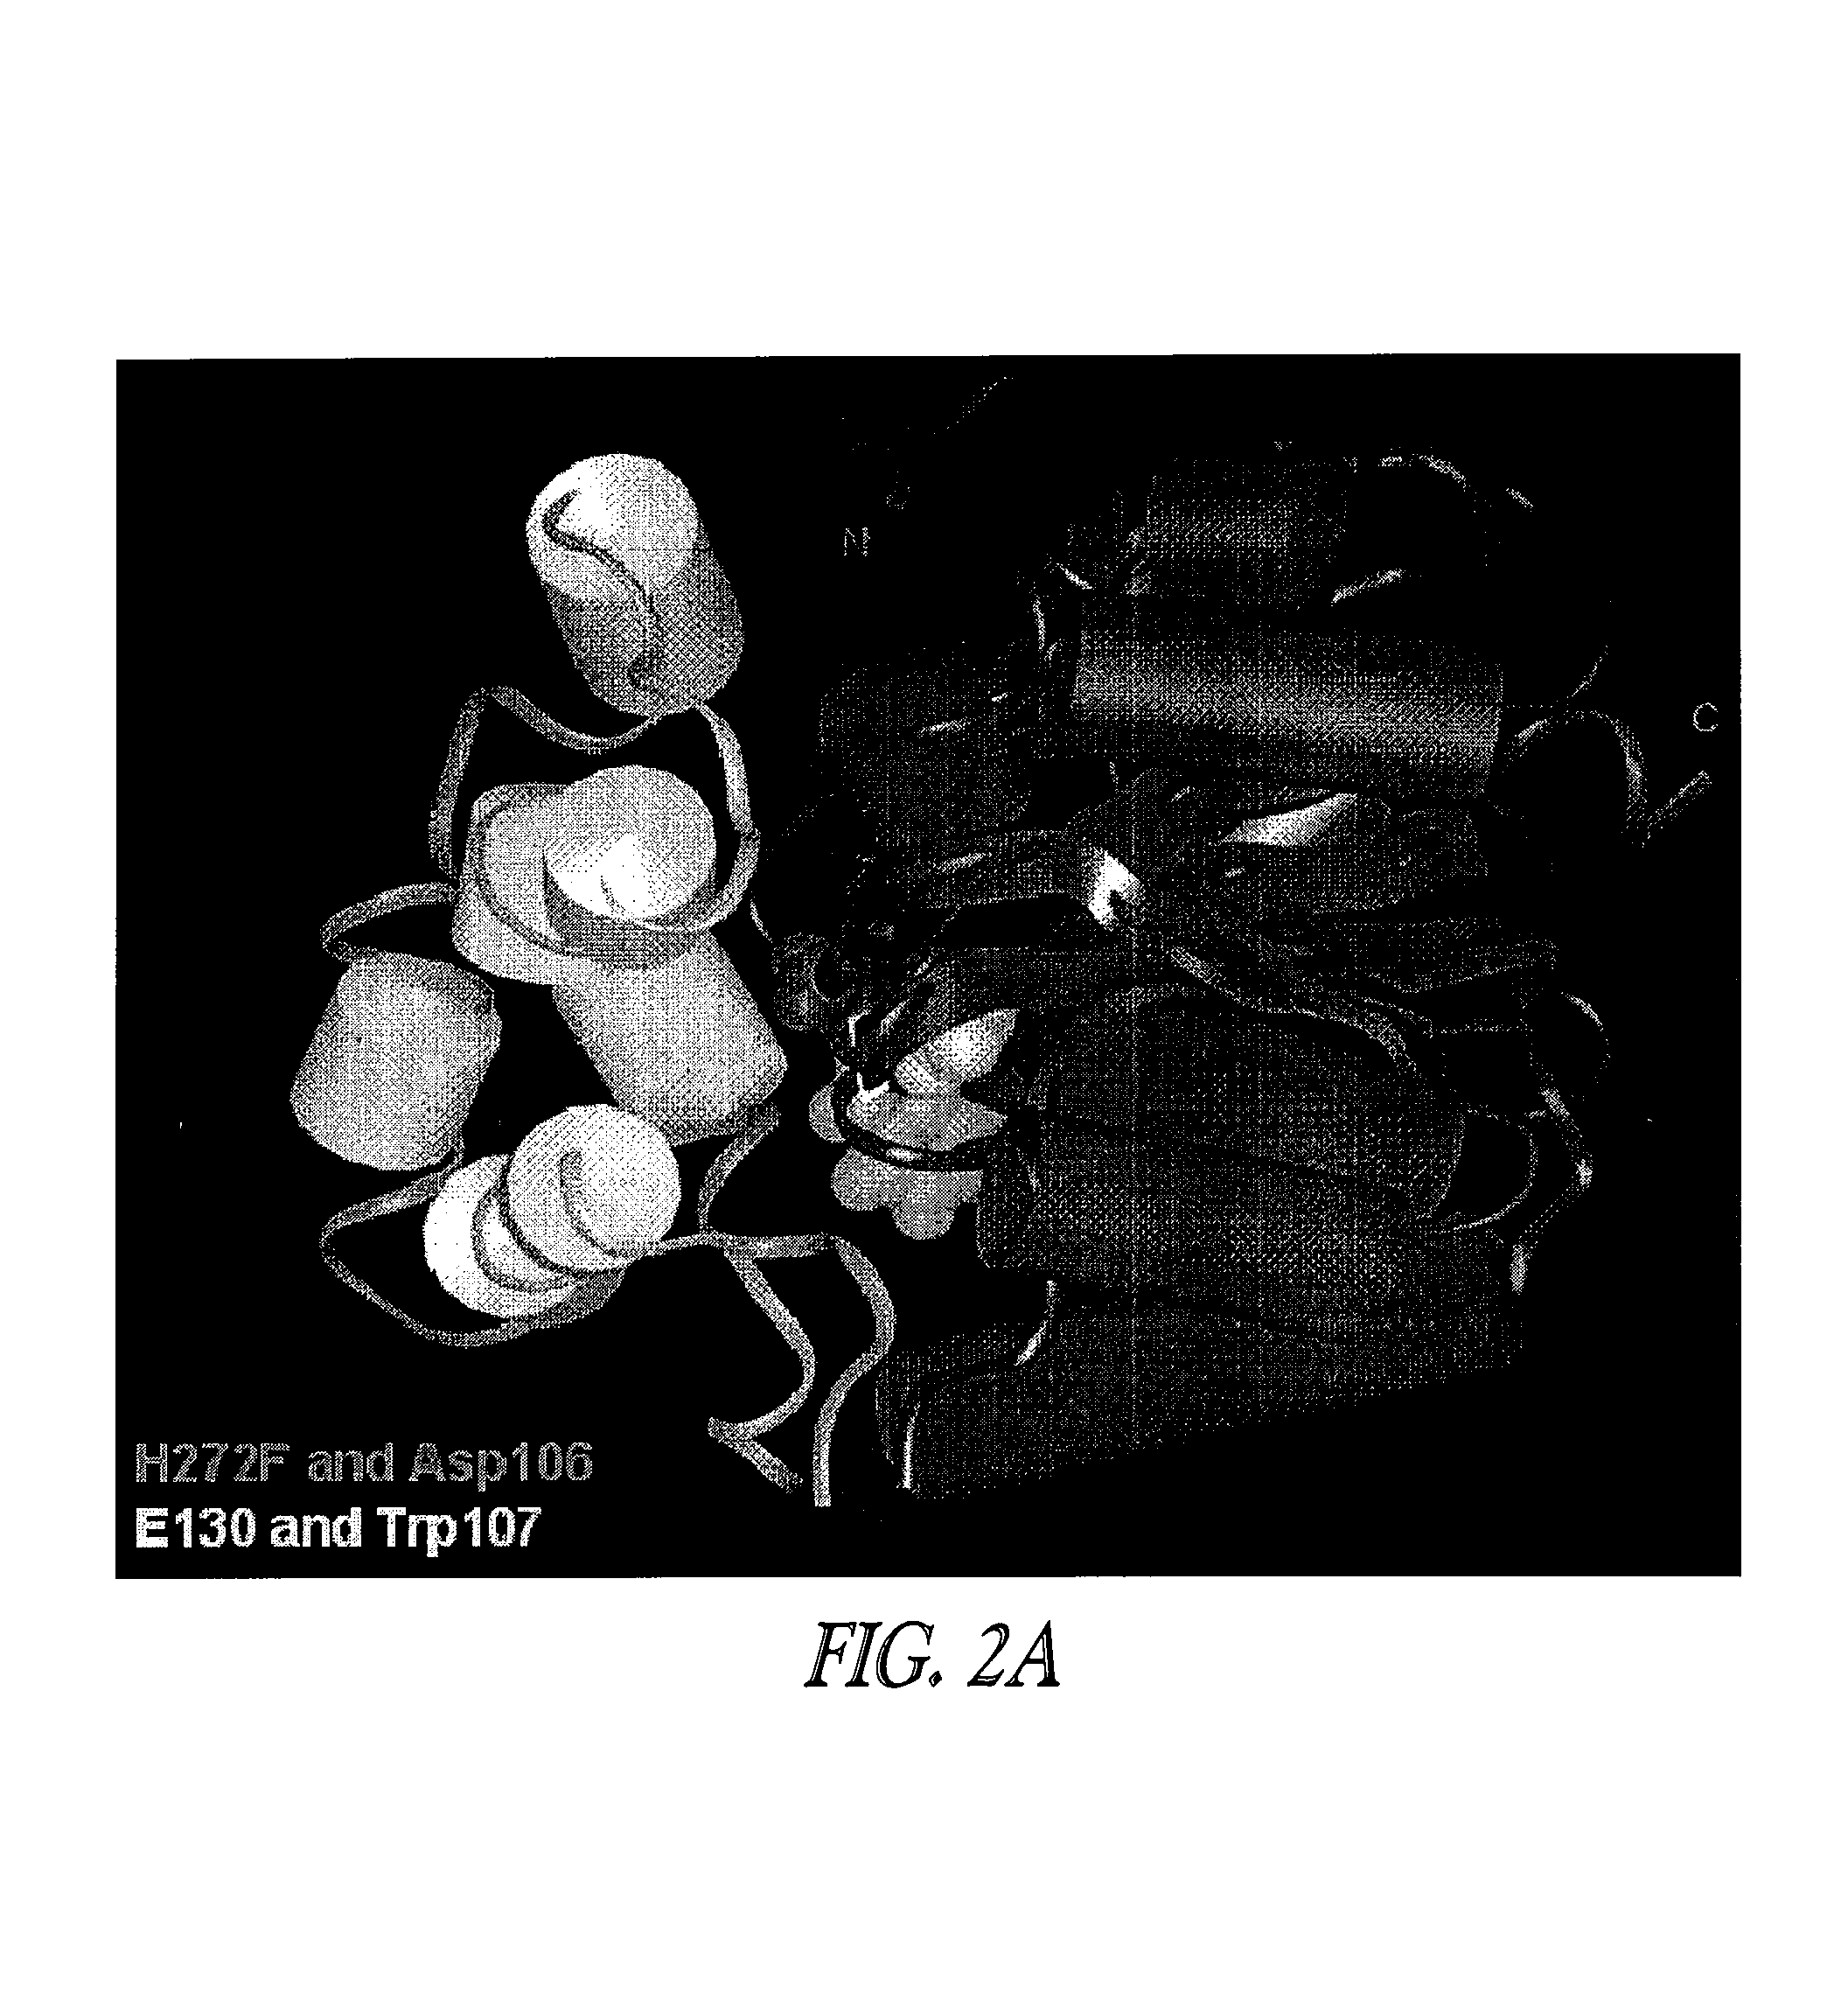 Covalent tethering of functional groups to proteins and substrates therefor